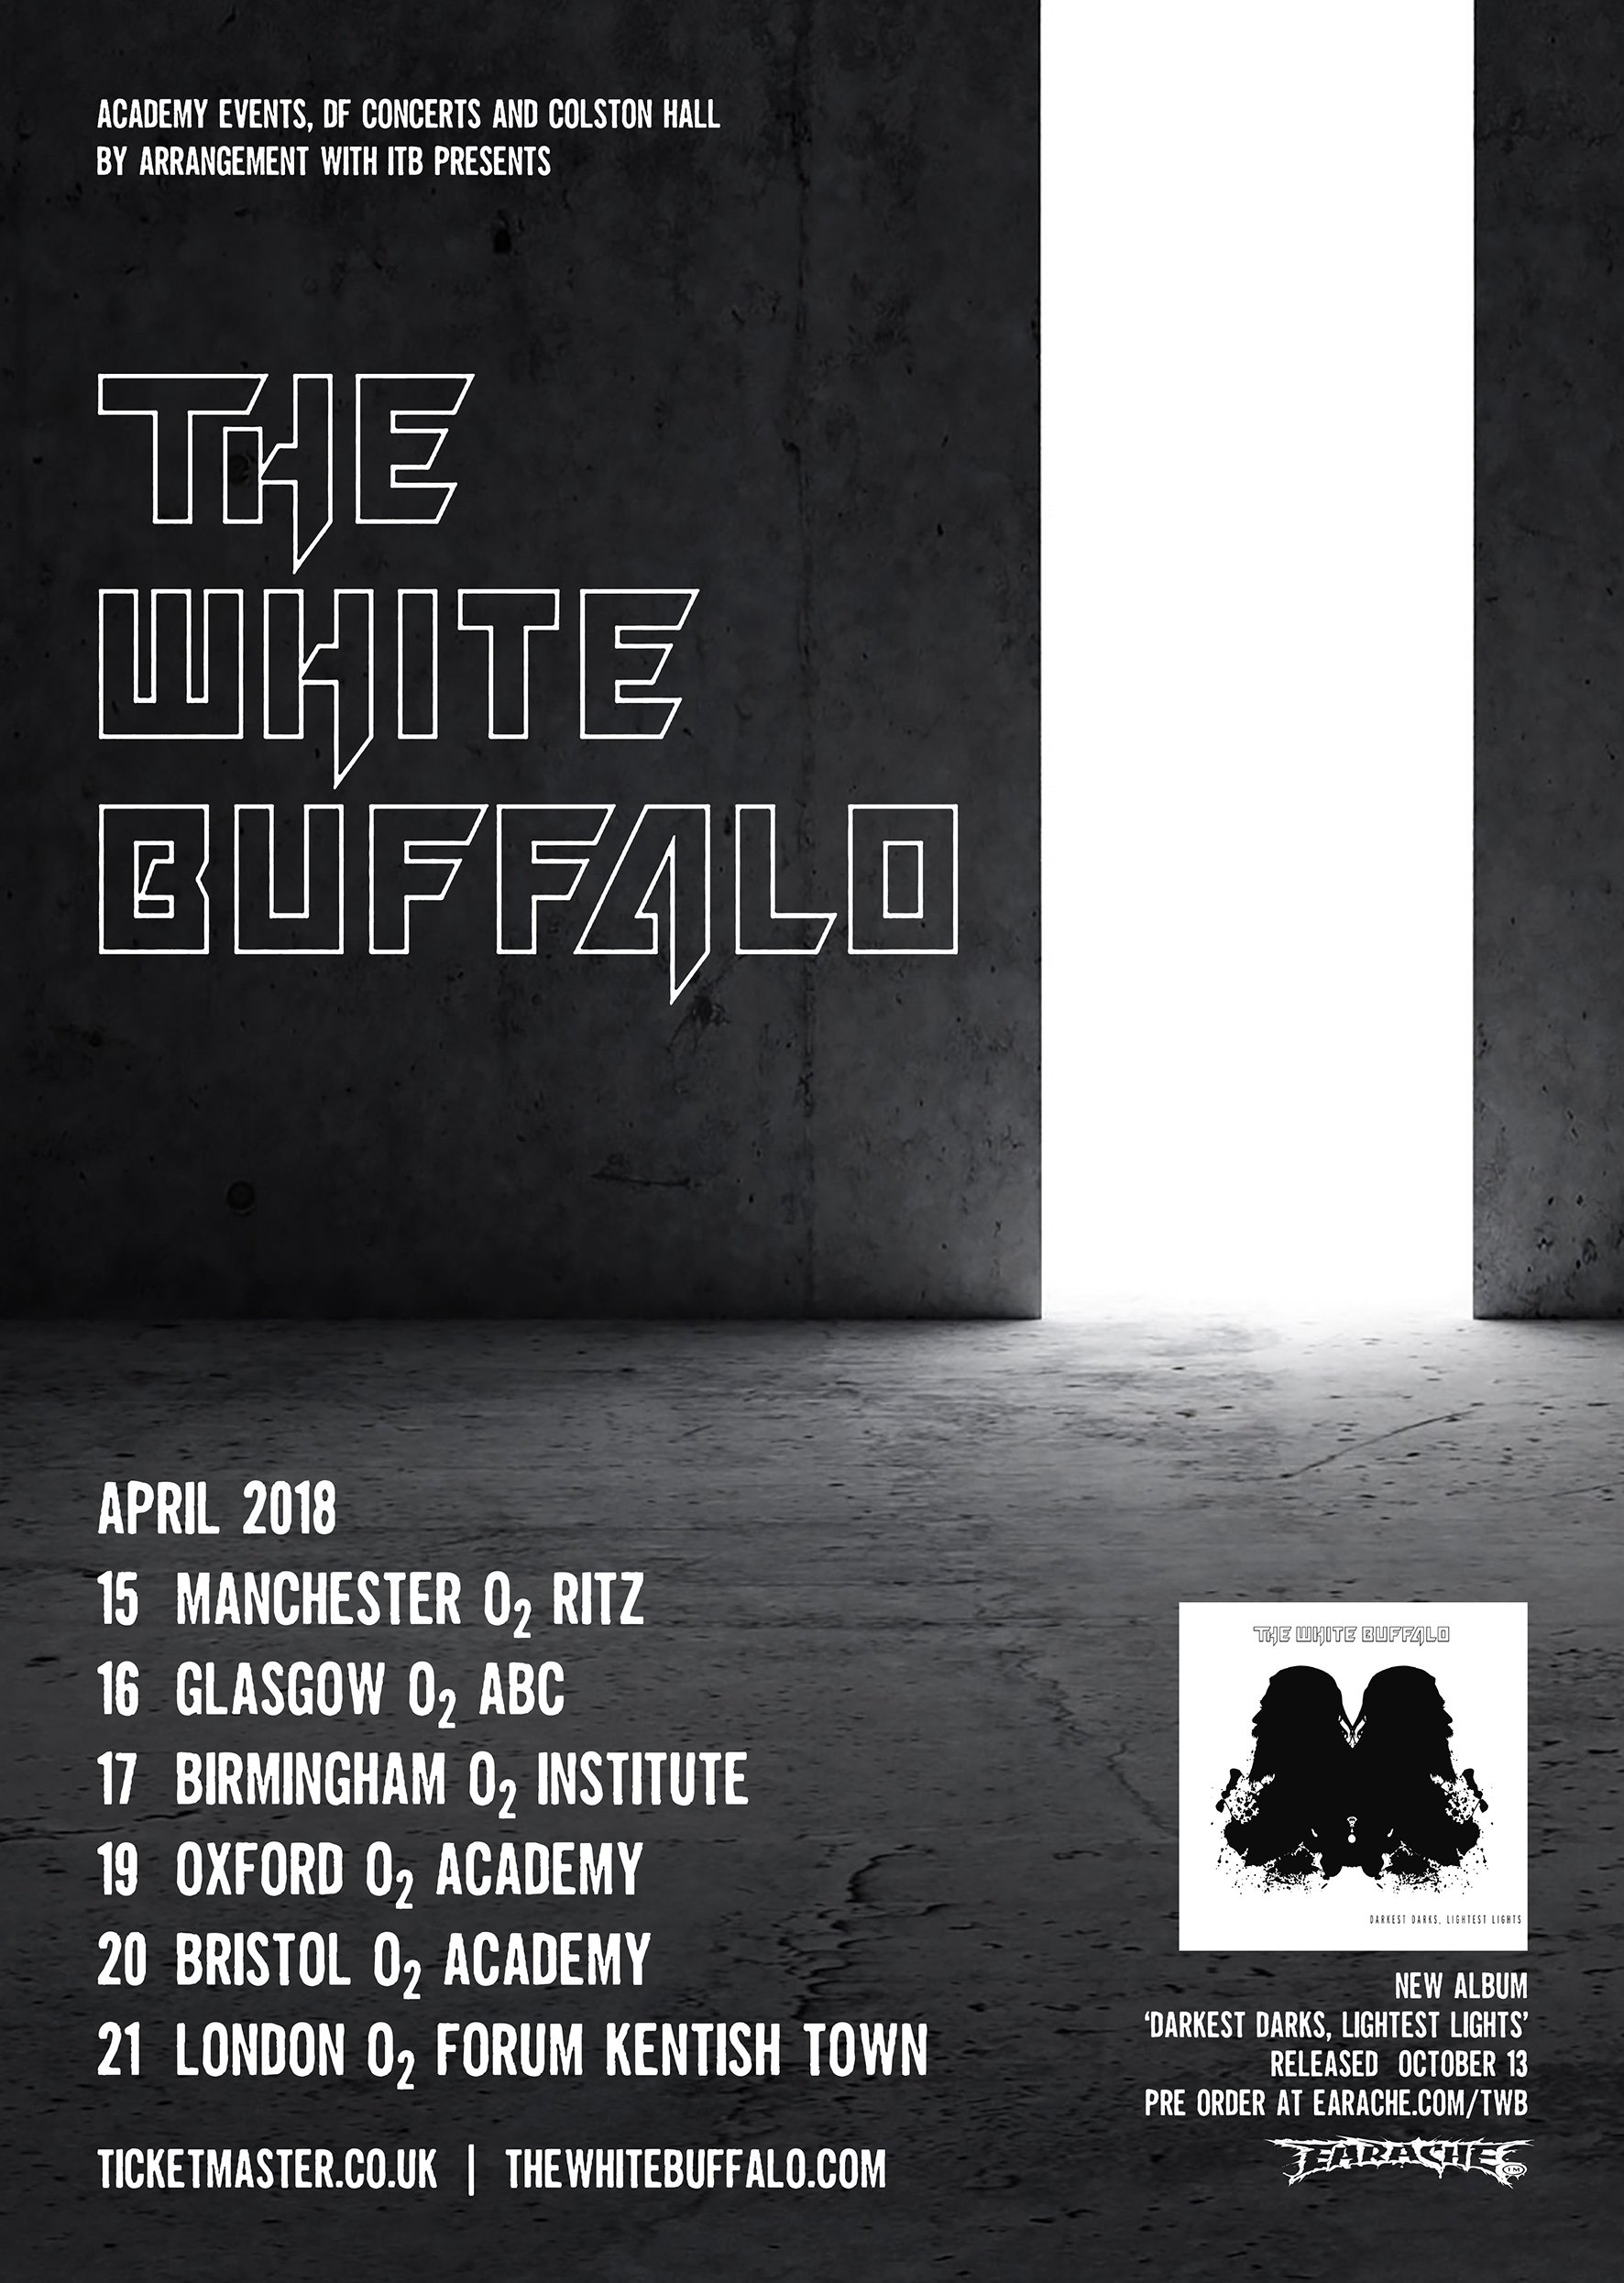 vente folkeafstemning Remission The White Buffalo on Twitter: "Europe 2018 tour dates! UK pre-sale starts  9am Monday 31 July at https://t.co/AxB0tk0Zz5. German shows on sale now!  https://t.co/BhY7m9T29E https://t.co/qXyww54ZKc" / Twitter